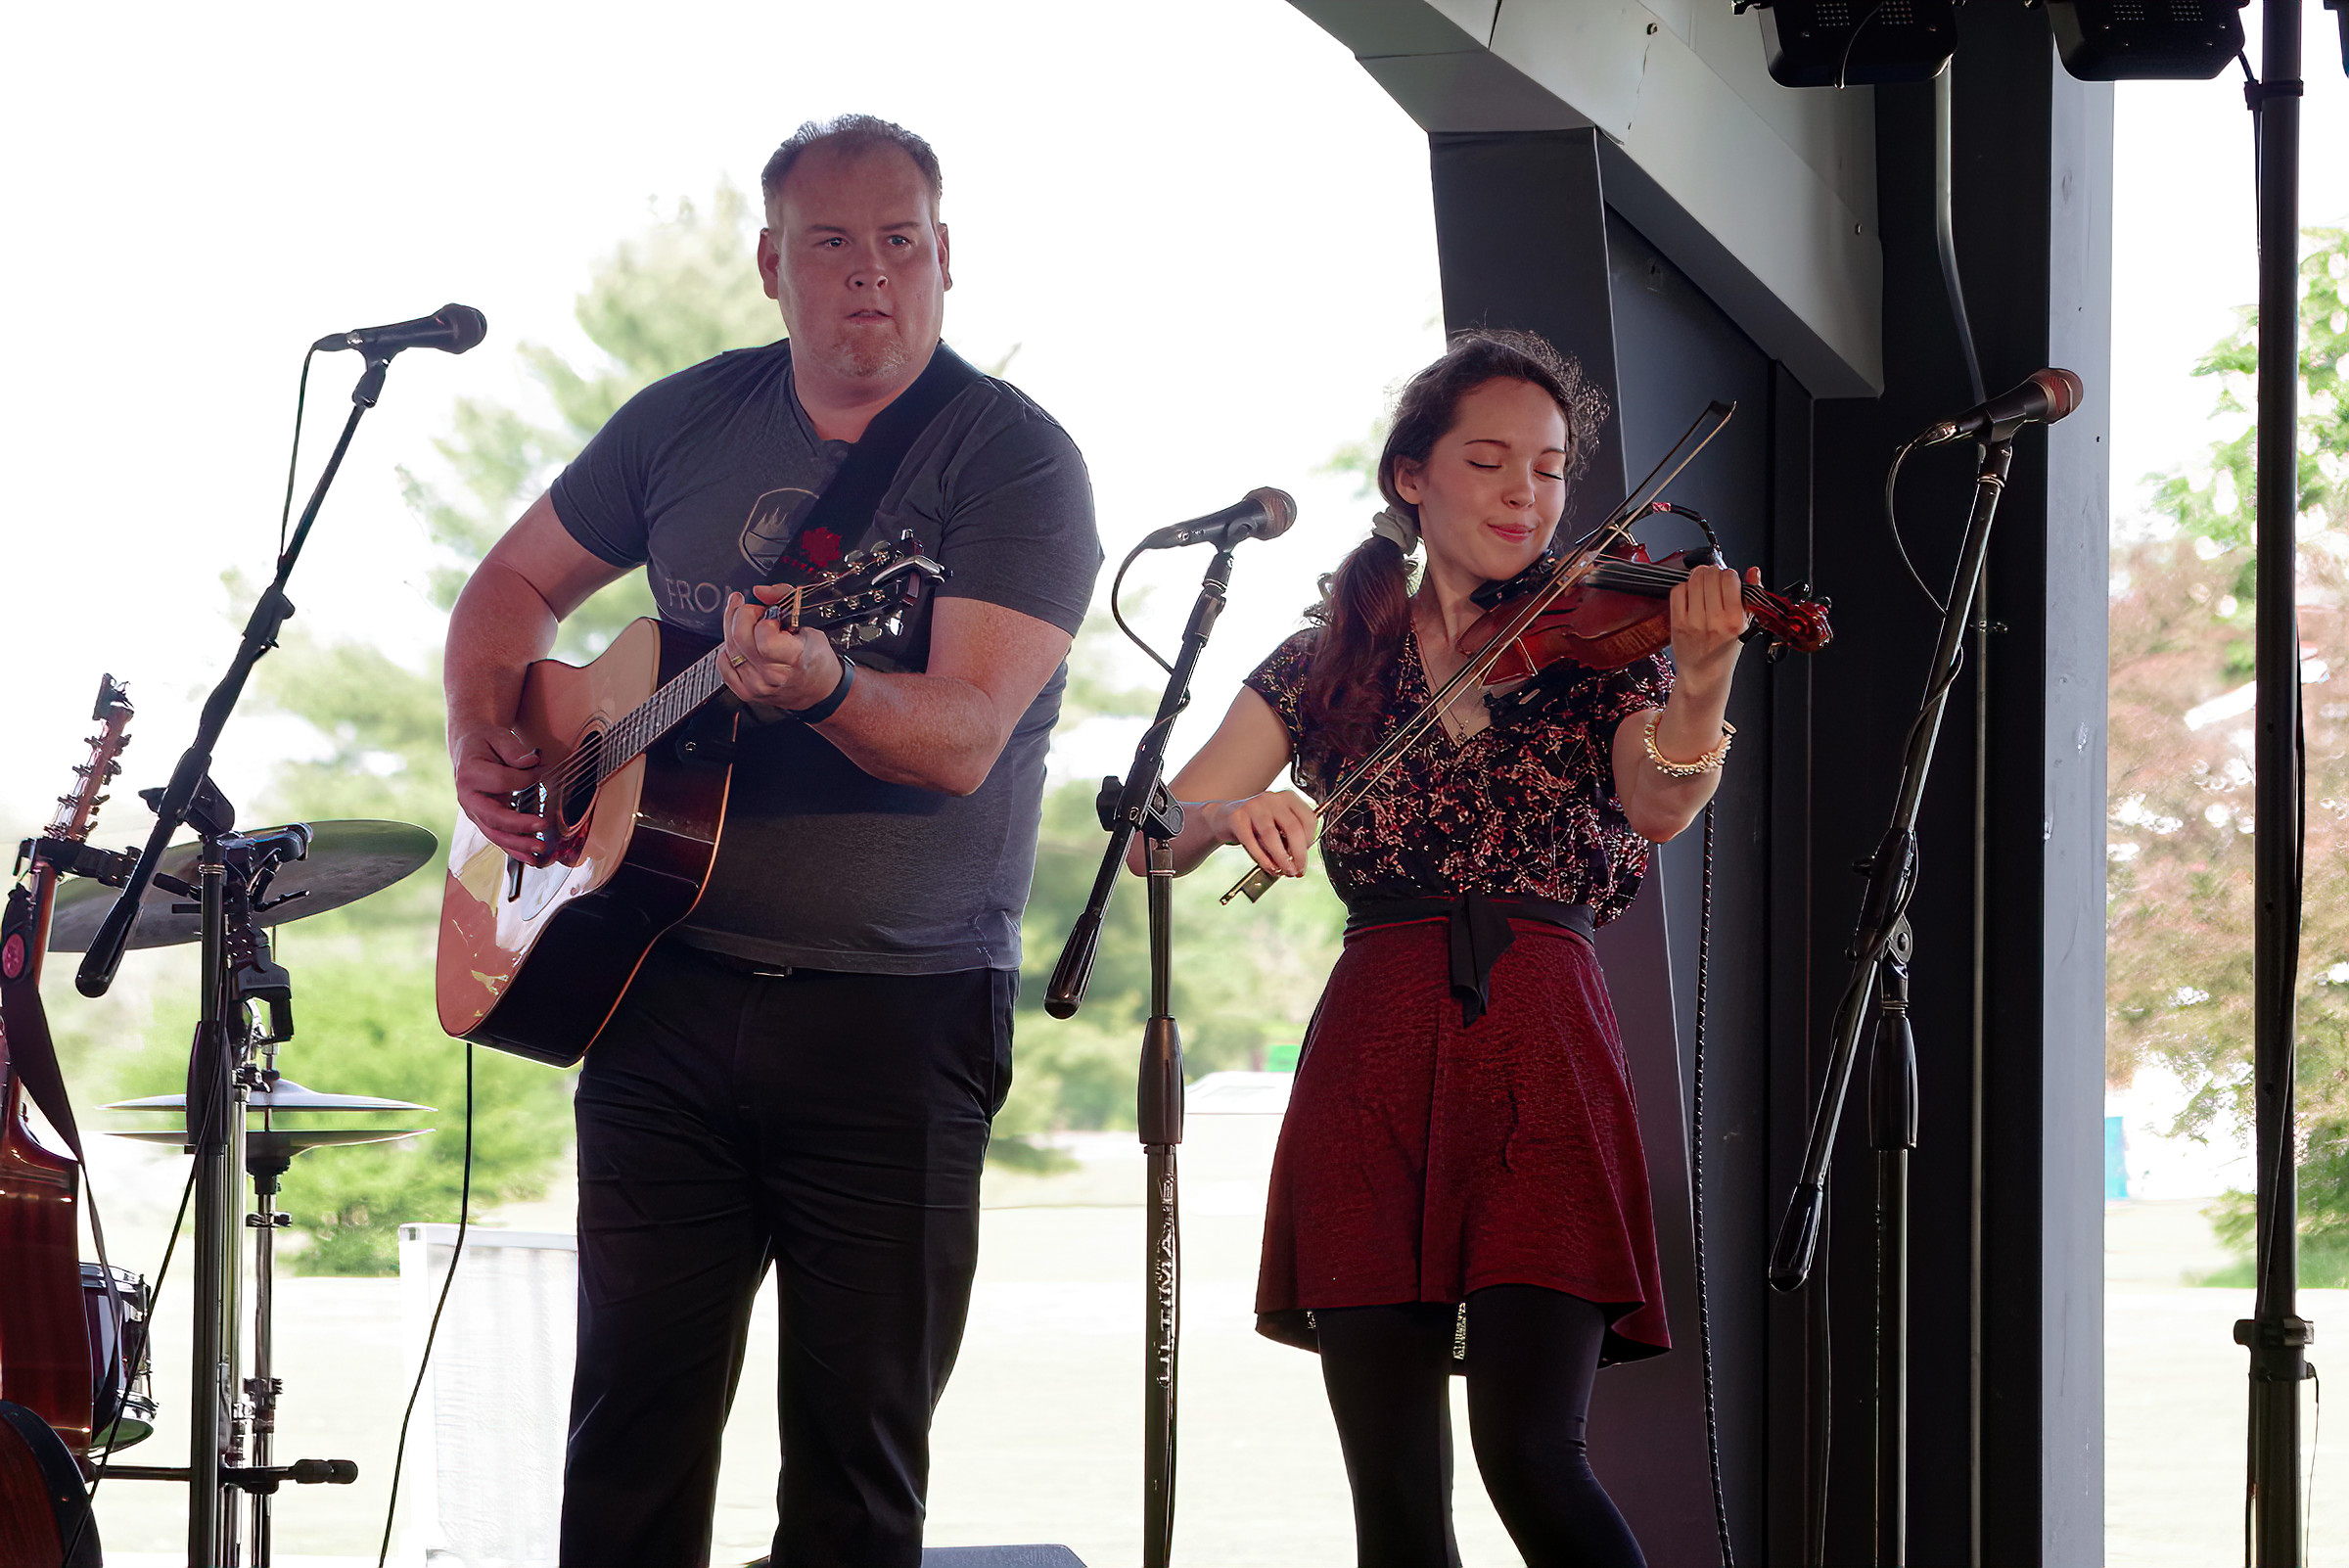 Chris Murphy and Jessica Wedden perform at last year's music festival